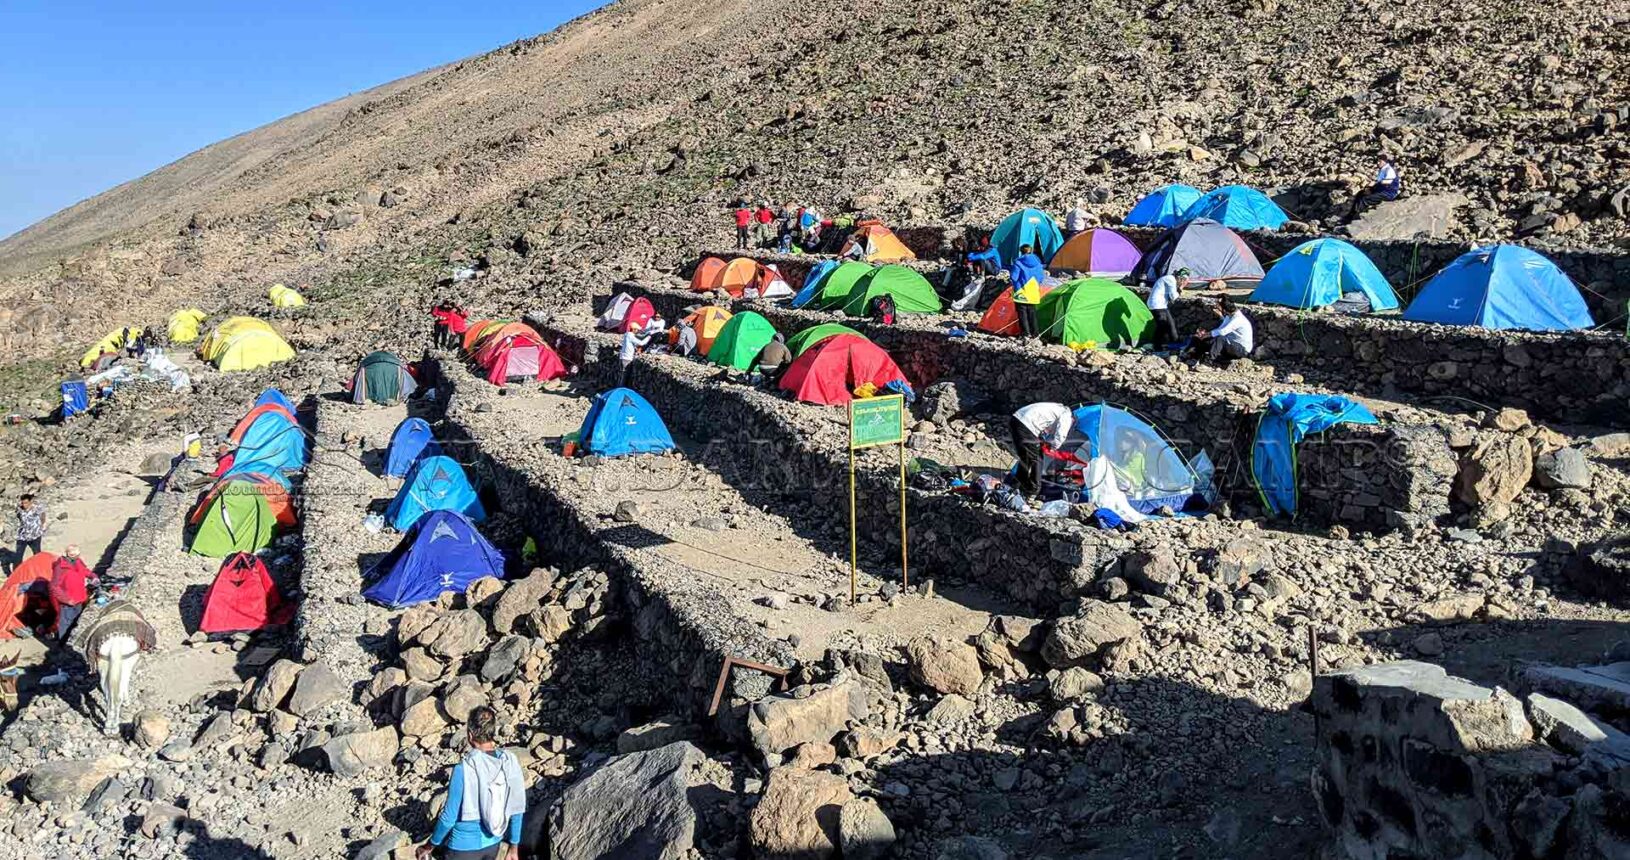 The designated area for tents at Camp 3 of Mount Damavand.